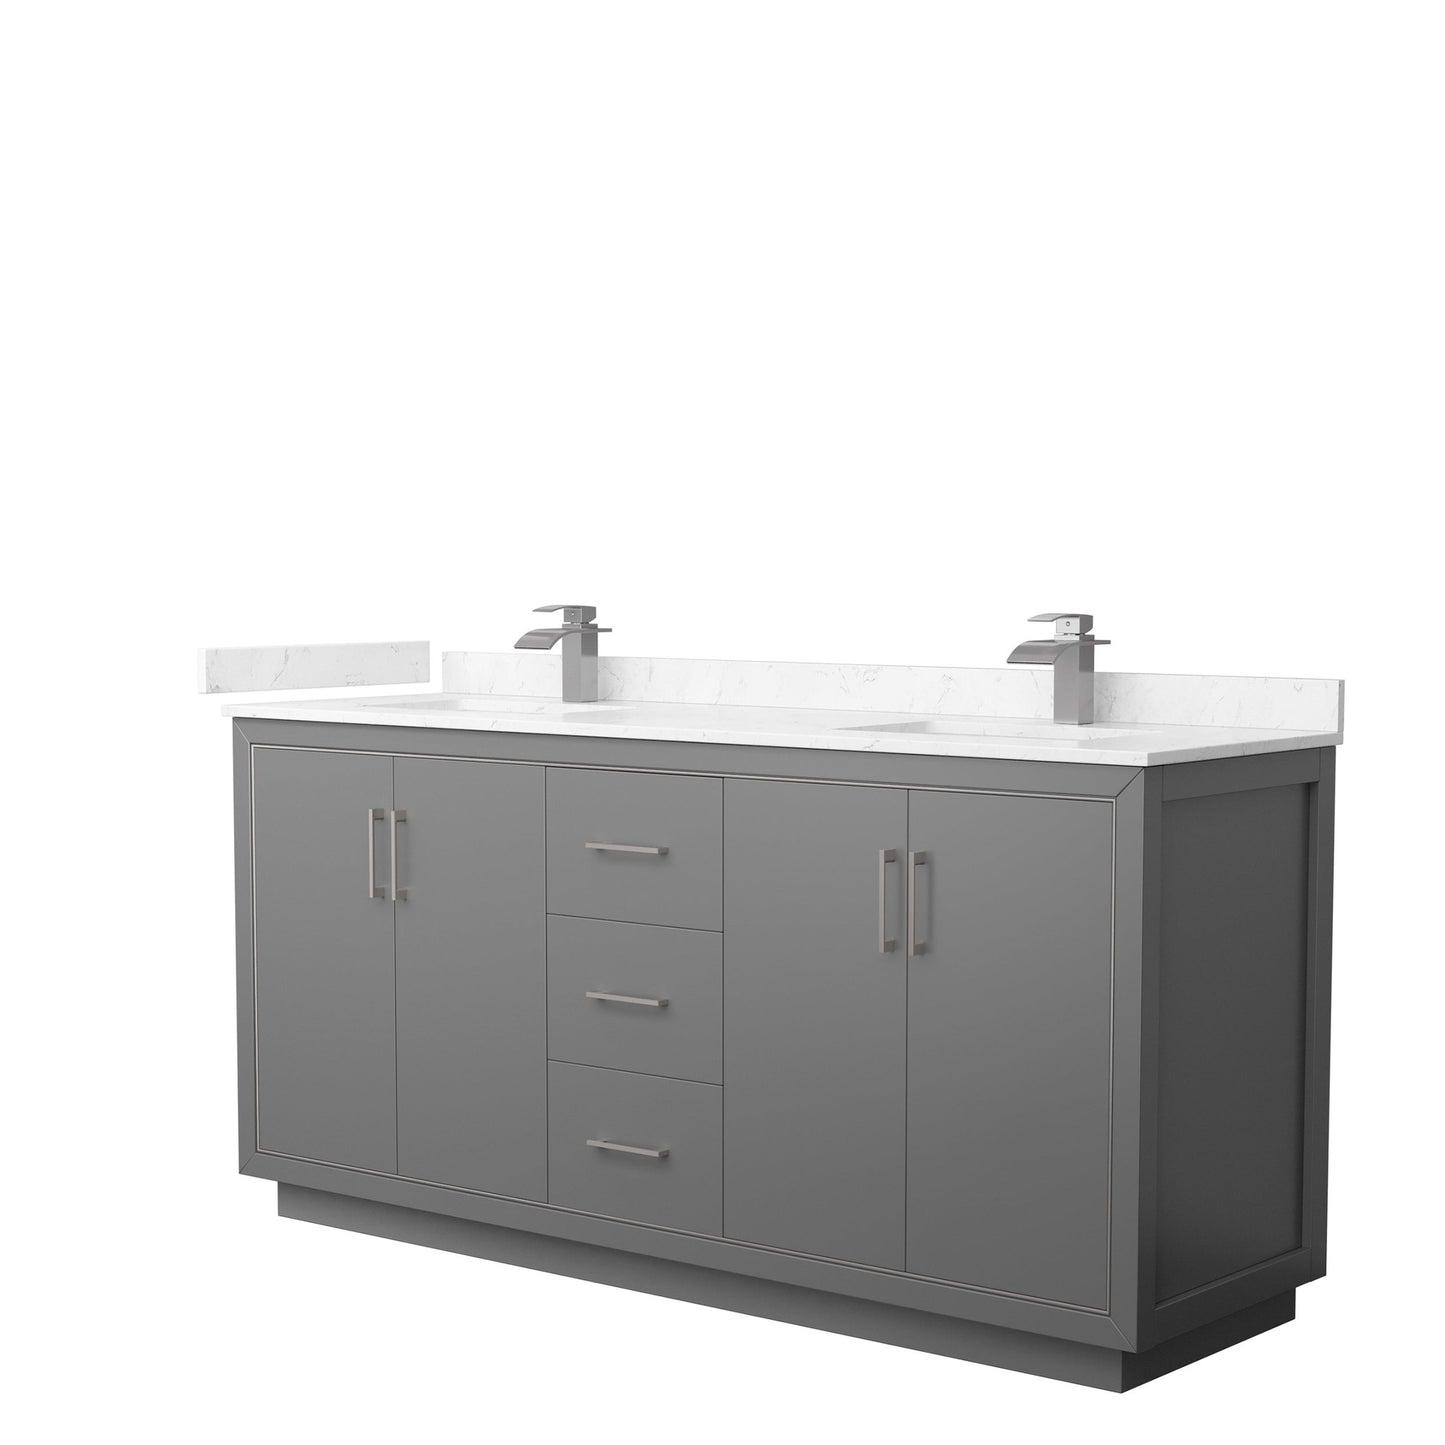 Wyndham Collection Icon 72" Double Bathroom Vanity in Dark Gray, Carrara Cultured Marble Countertop, Undermount Square Sinks, Brushed Nickel Trim